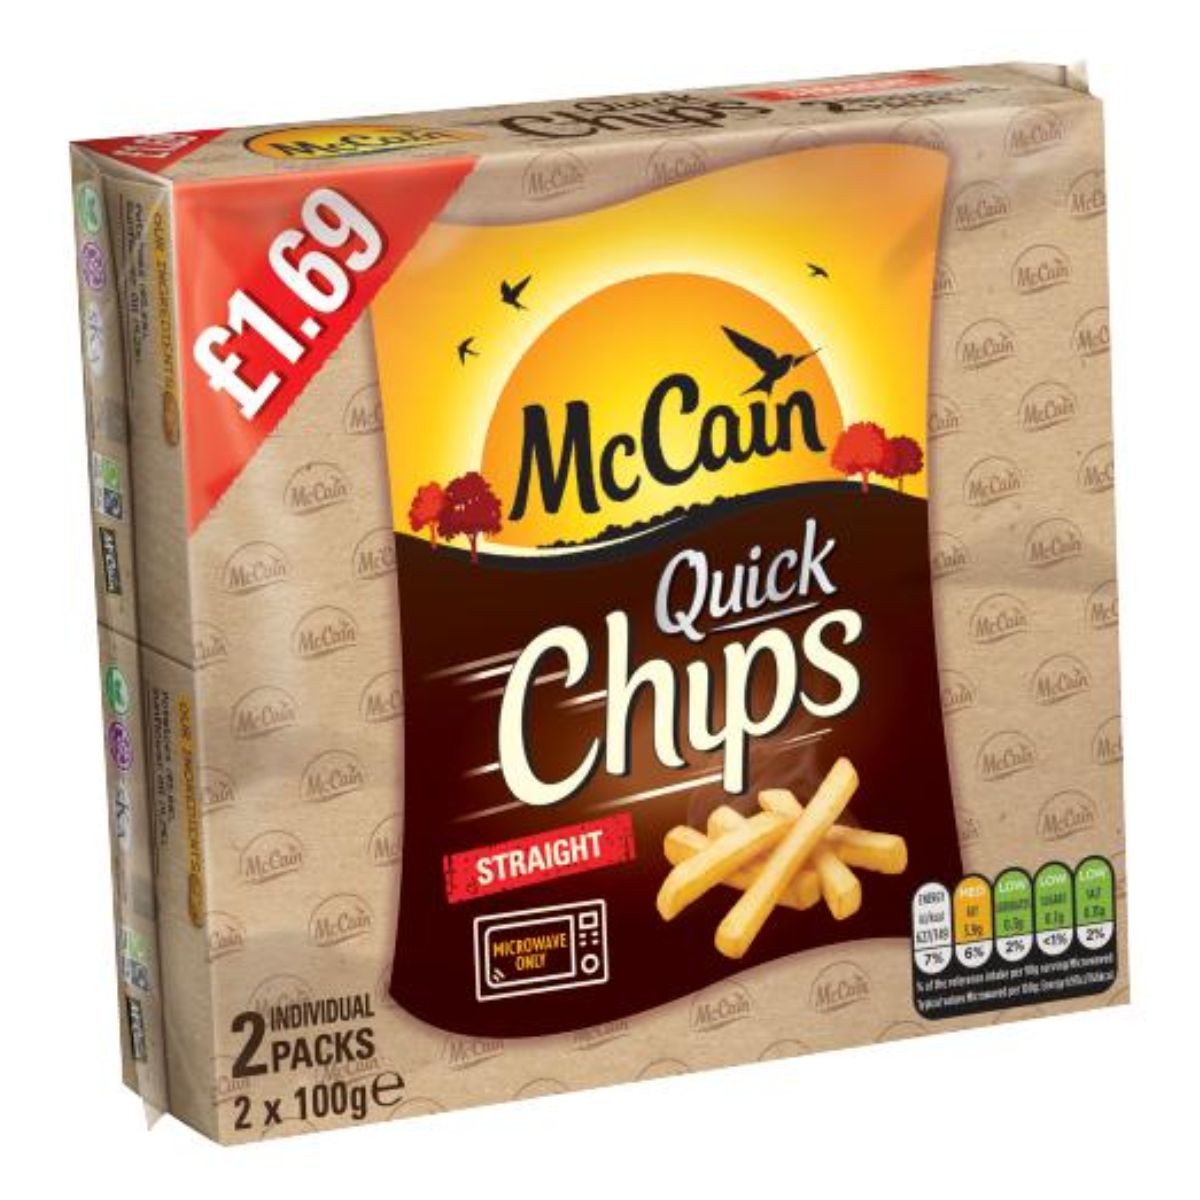 McCain - Quick Chips Straight - 2 x 100g in a box.